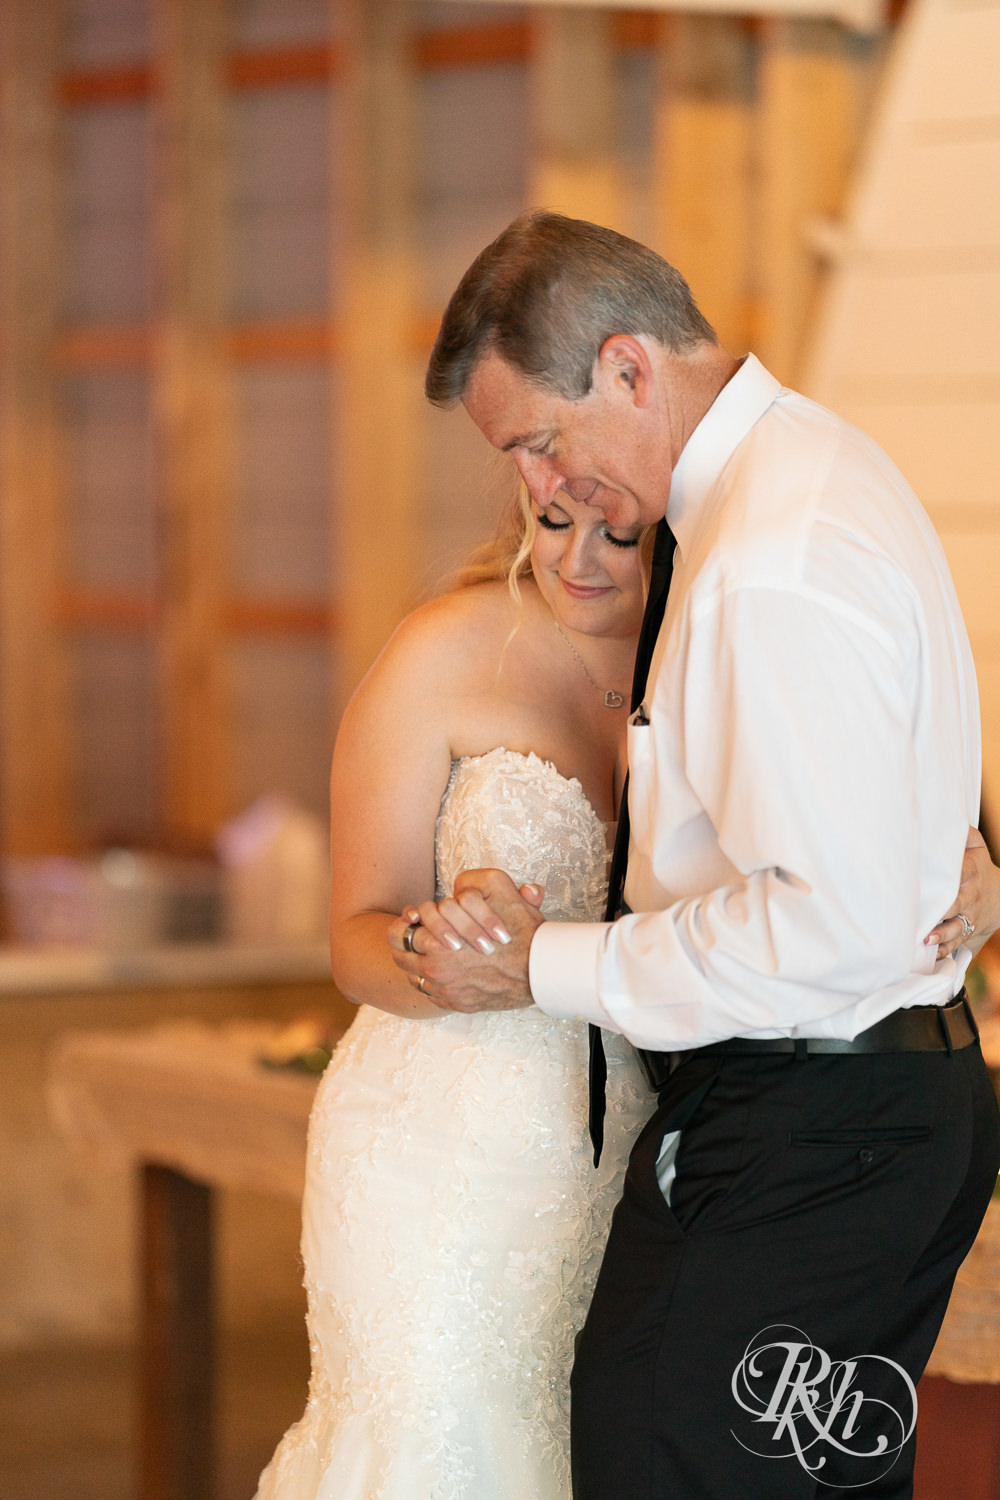 Bride dances with dad at wedding reception at Cottage Farmhouse in Glencoe, Minnesota.